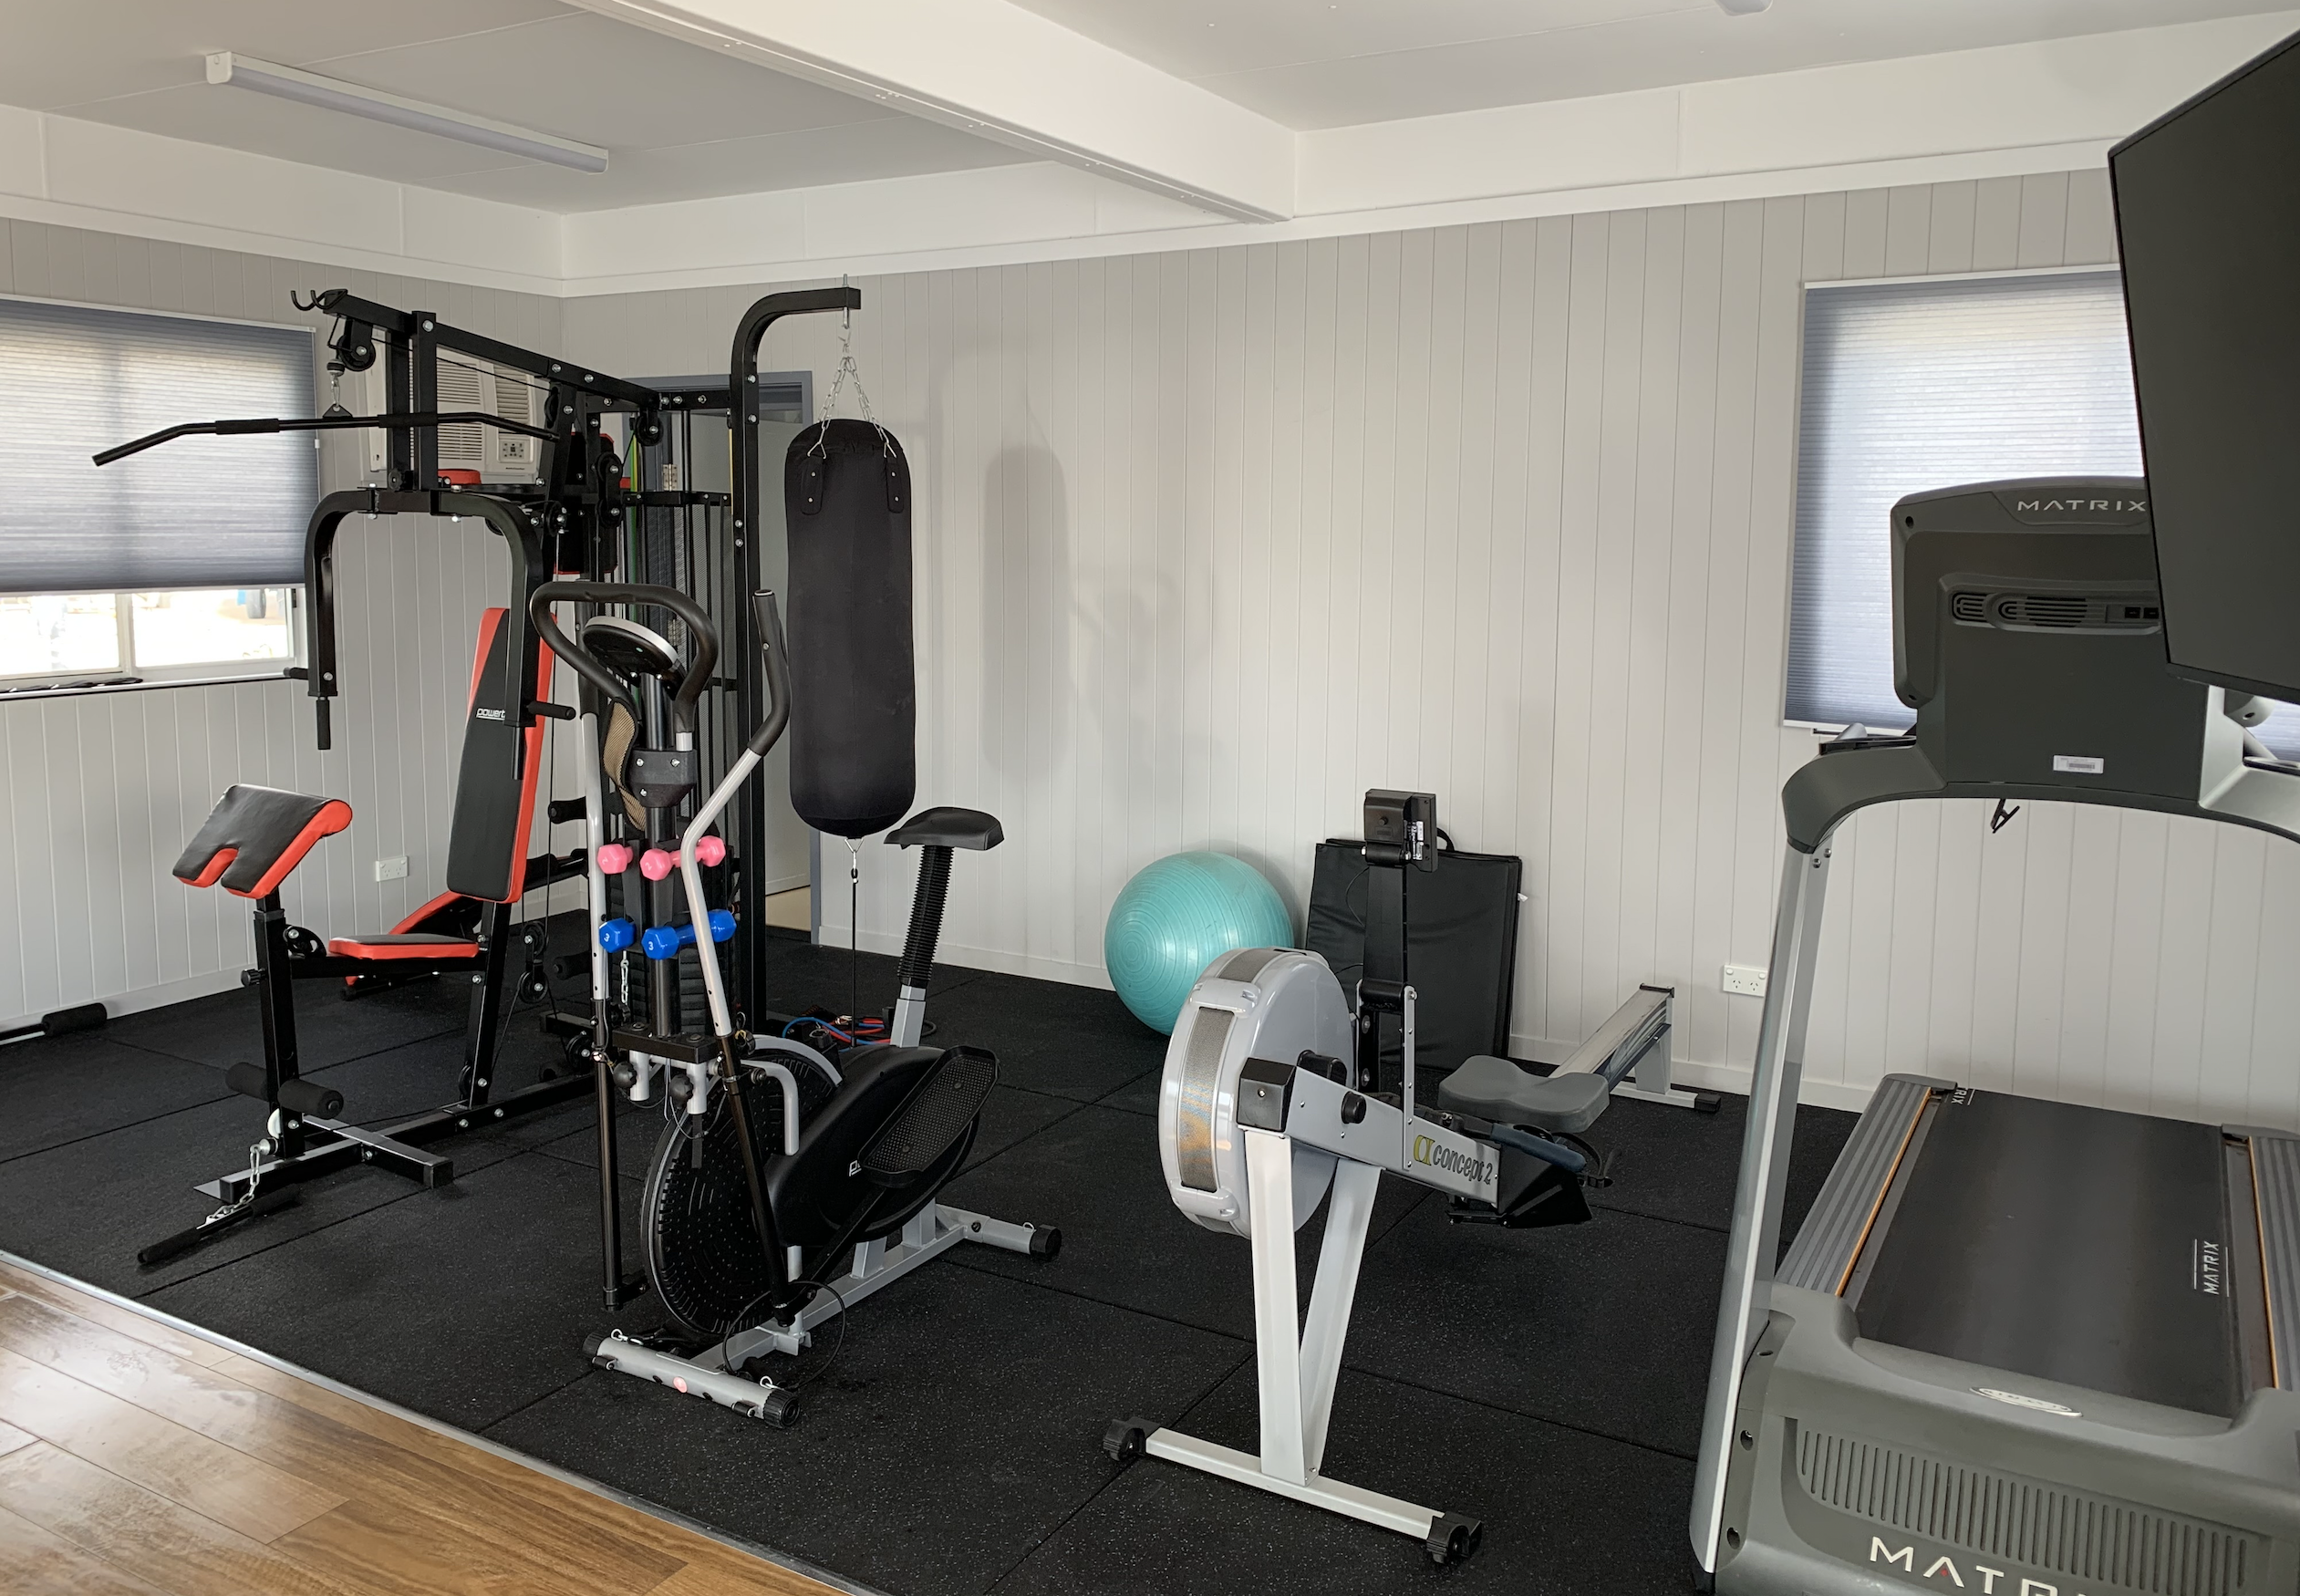 Air-Conditioned Crew Zone with gym facilities, kitchen and lounge